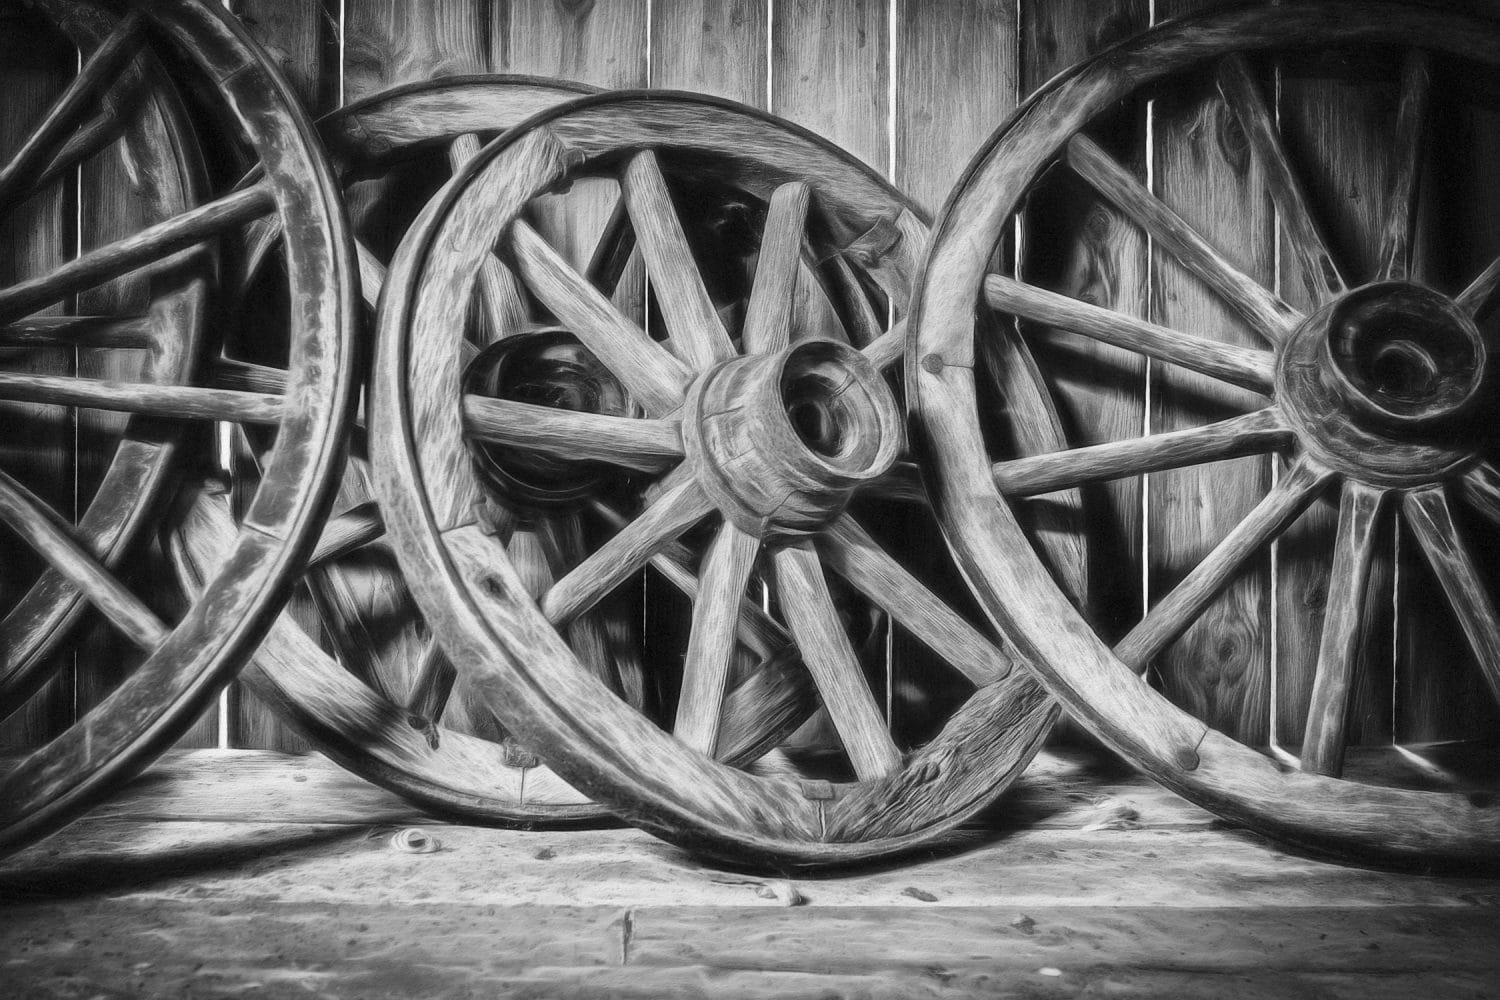 The Old Wooden Wheel